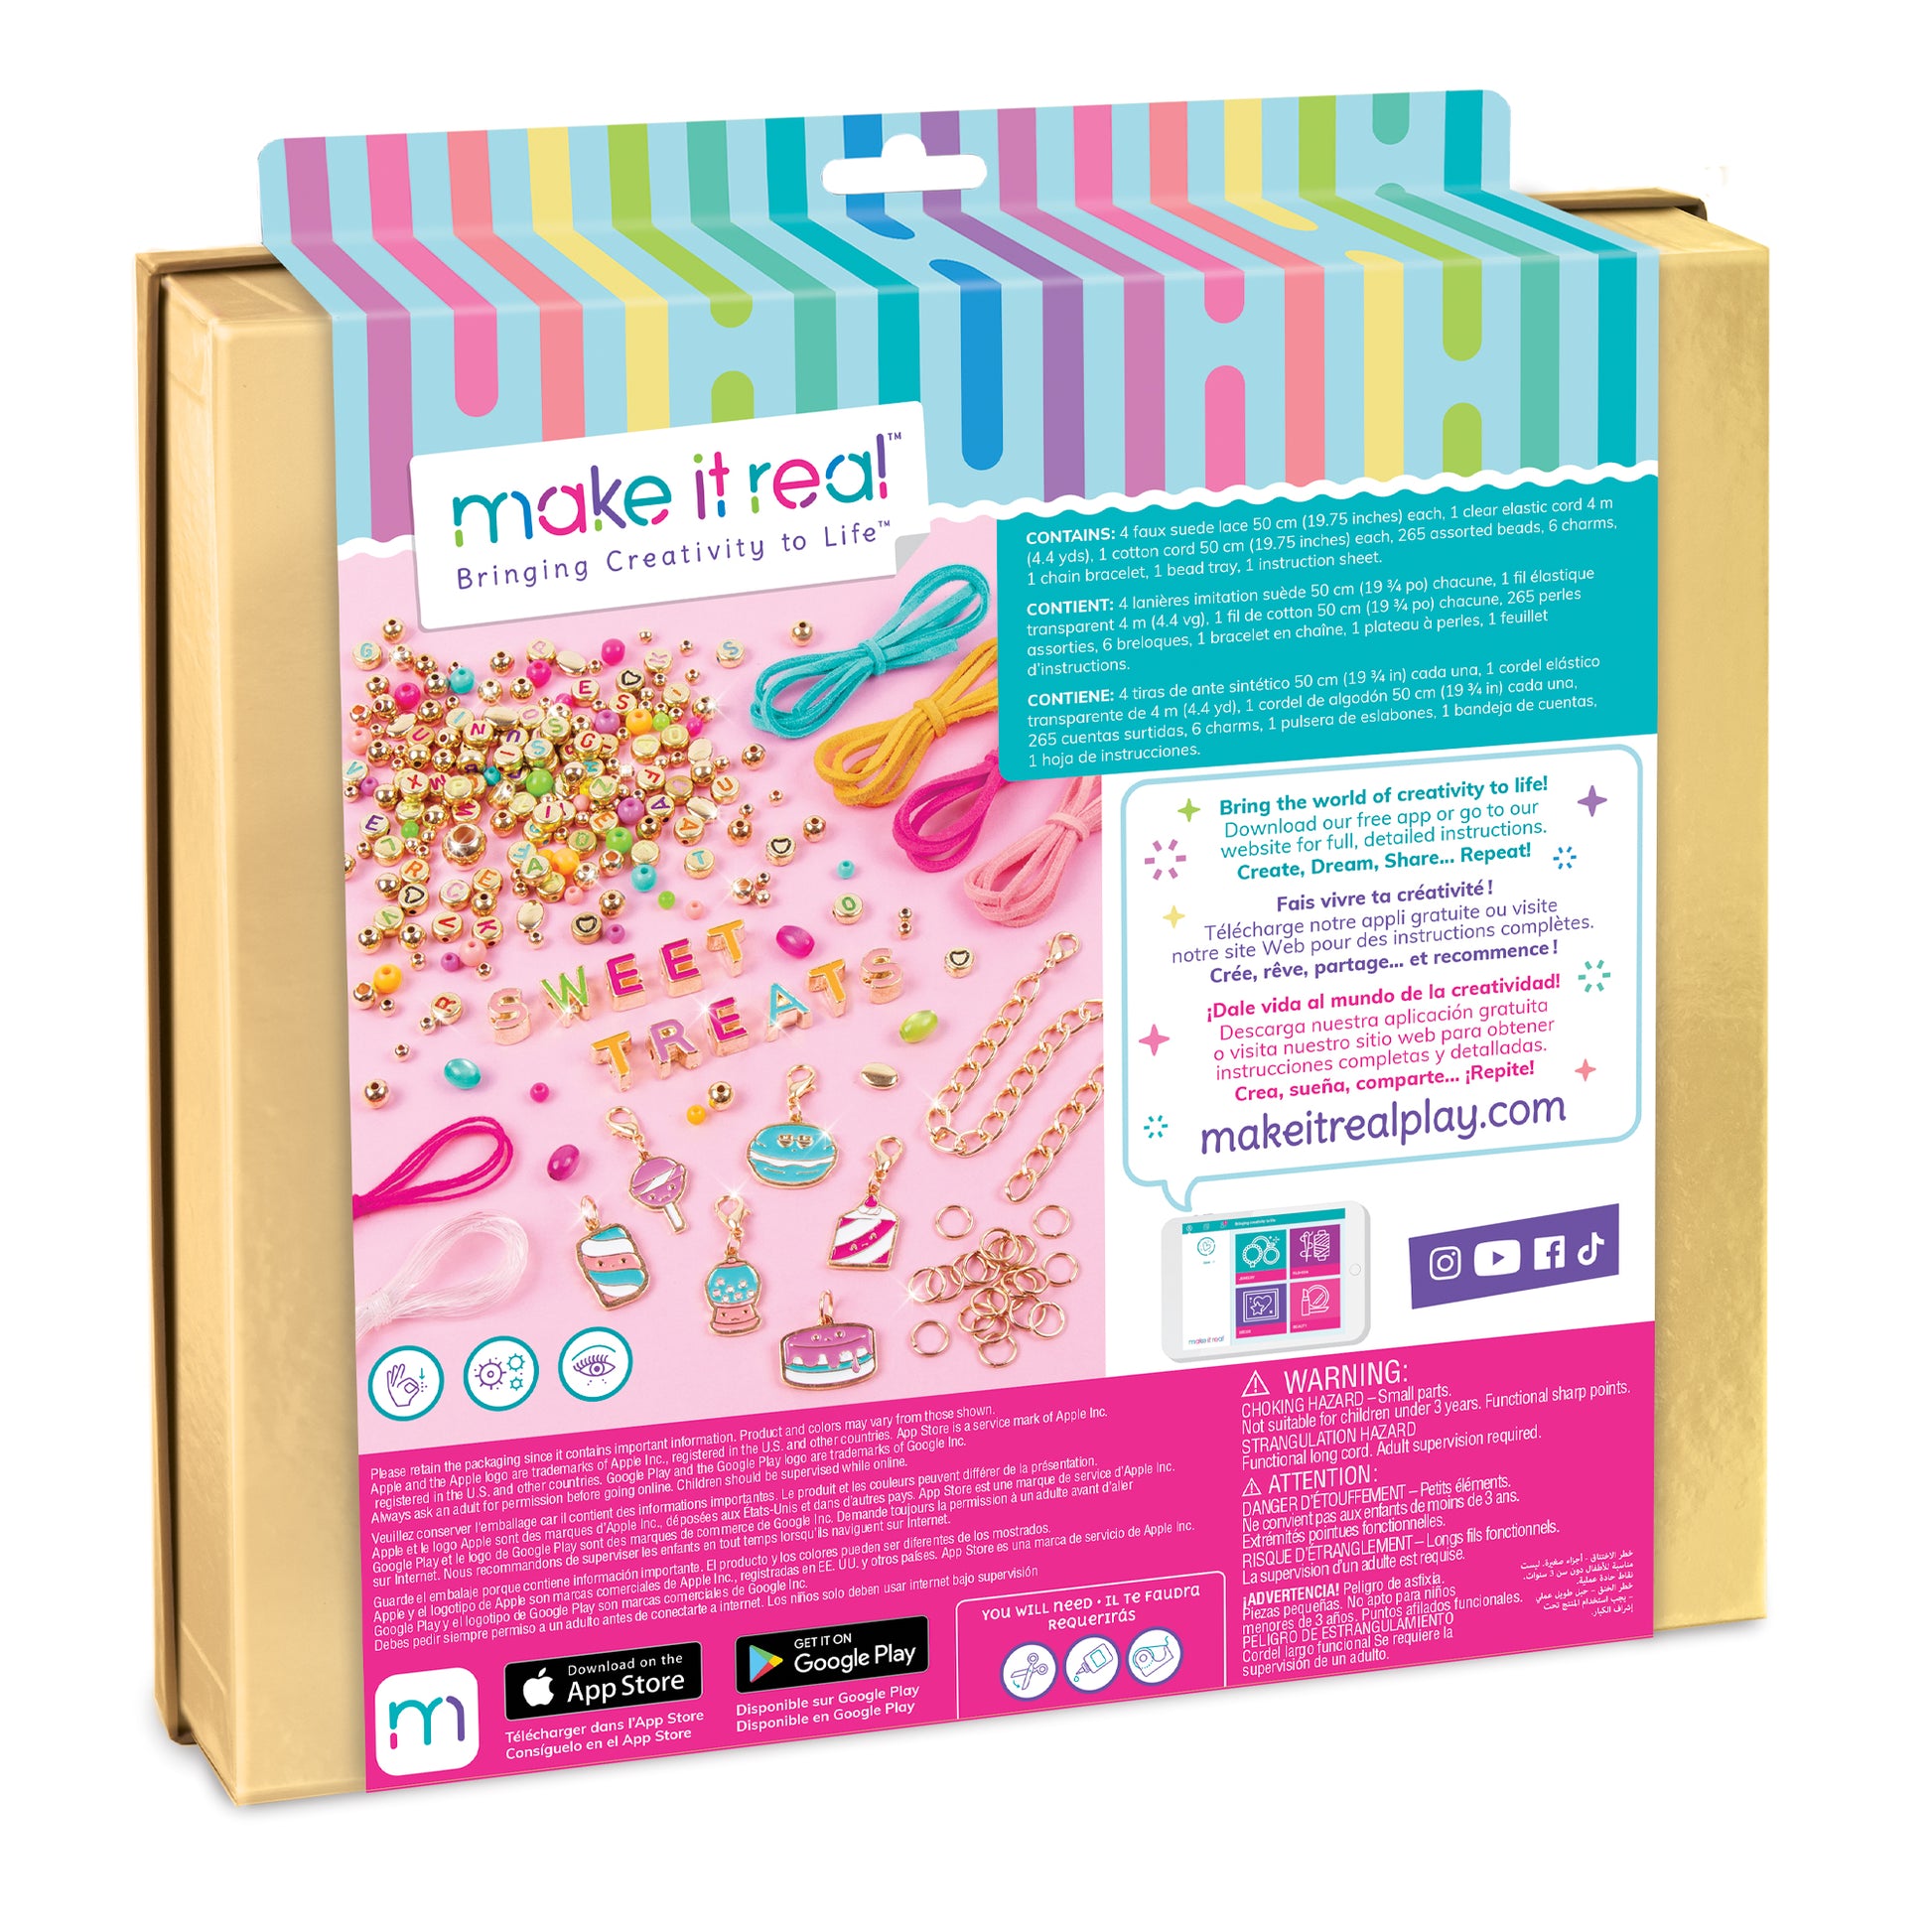 Make It Real: Rainbow DIY Bling Bracelets Kit - Create 5 Unique Cord Charm  Bracelets, 82 Pieces, Includes Play Tray, All-In-One, Tweens & Girls, Arts  & Crafts, Kids Ages 8+ 